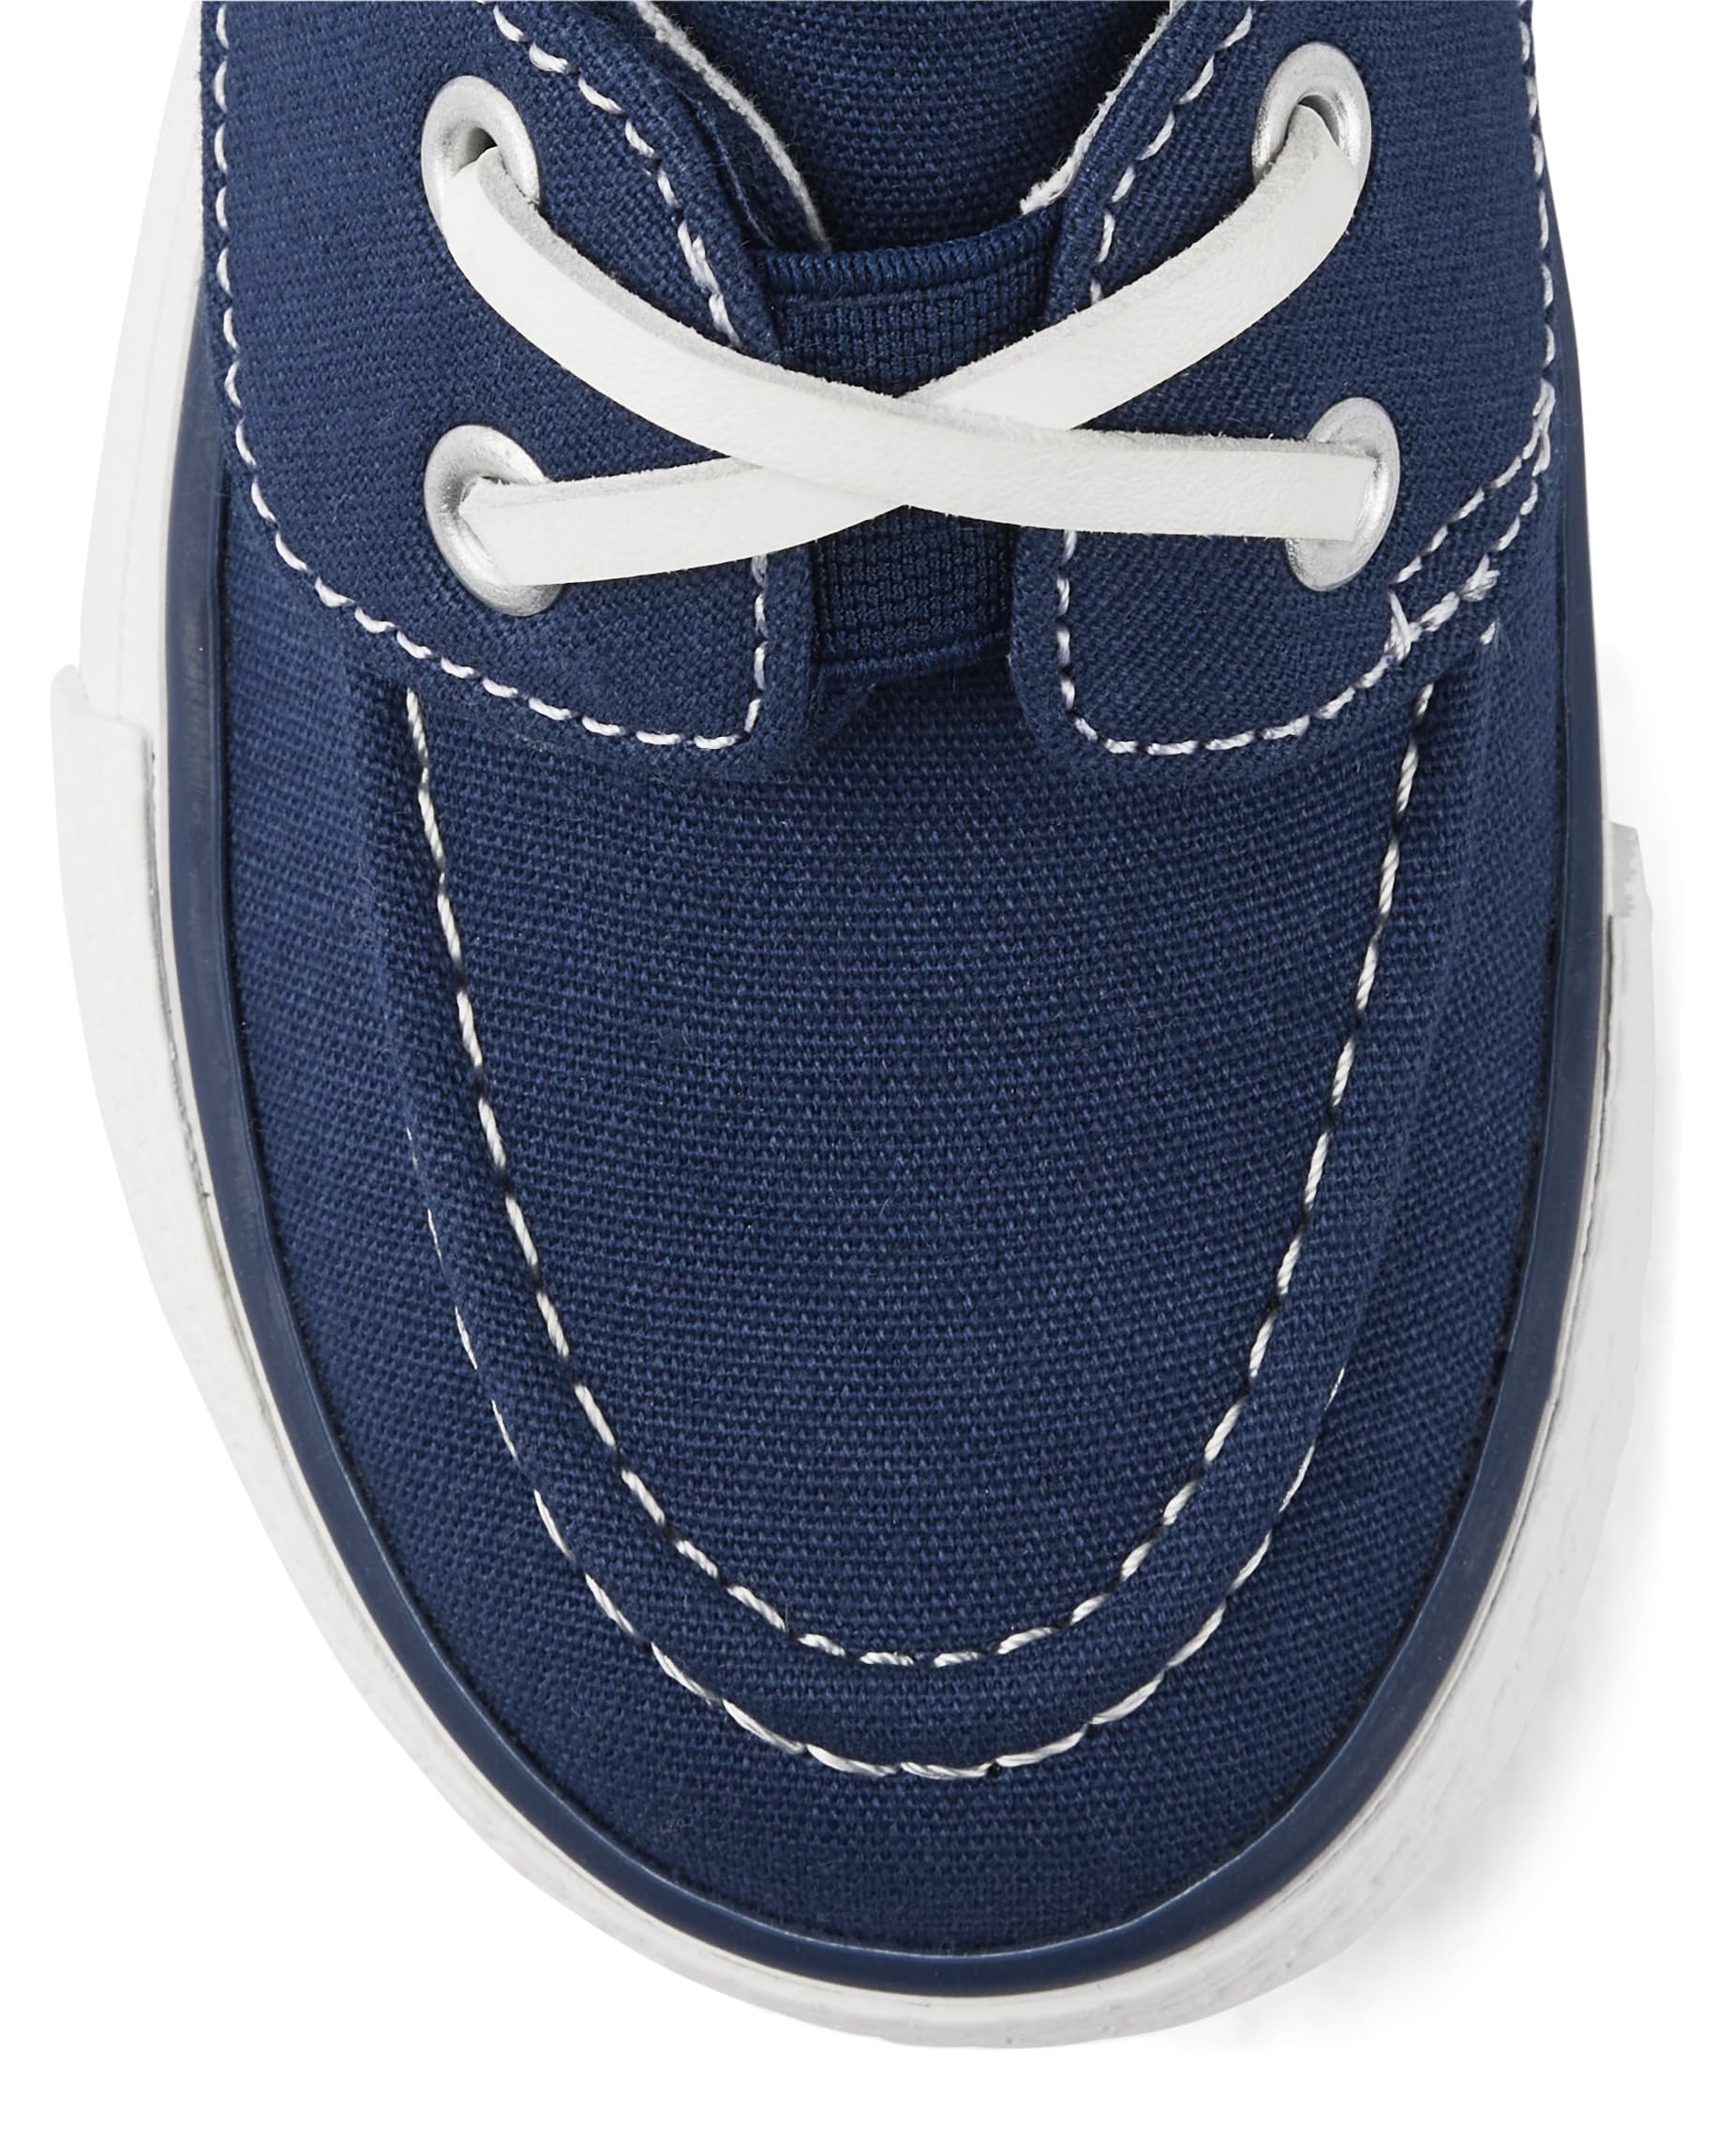 Gymboree Girl's and Toddler Boat Shoe